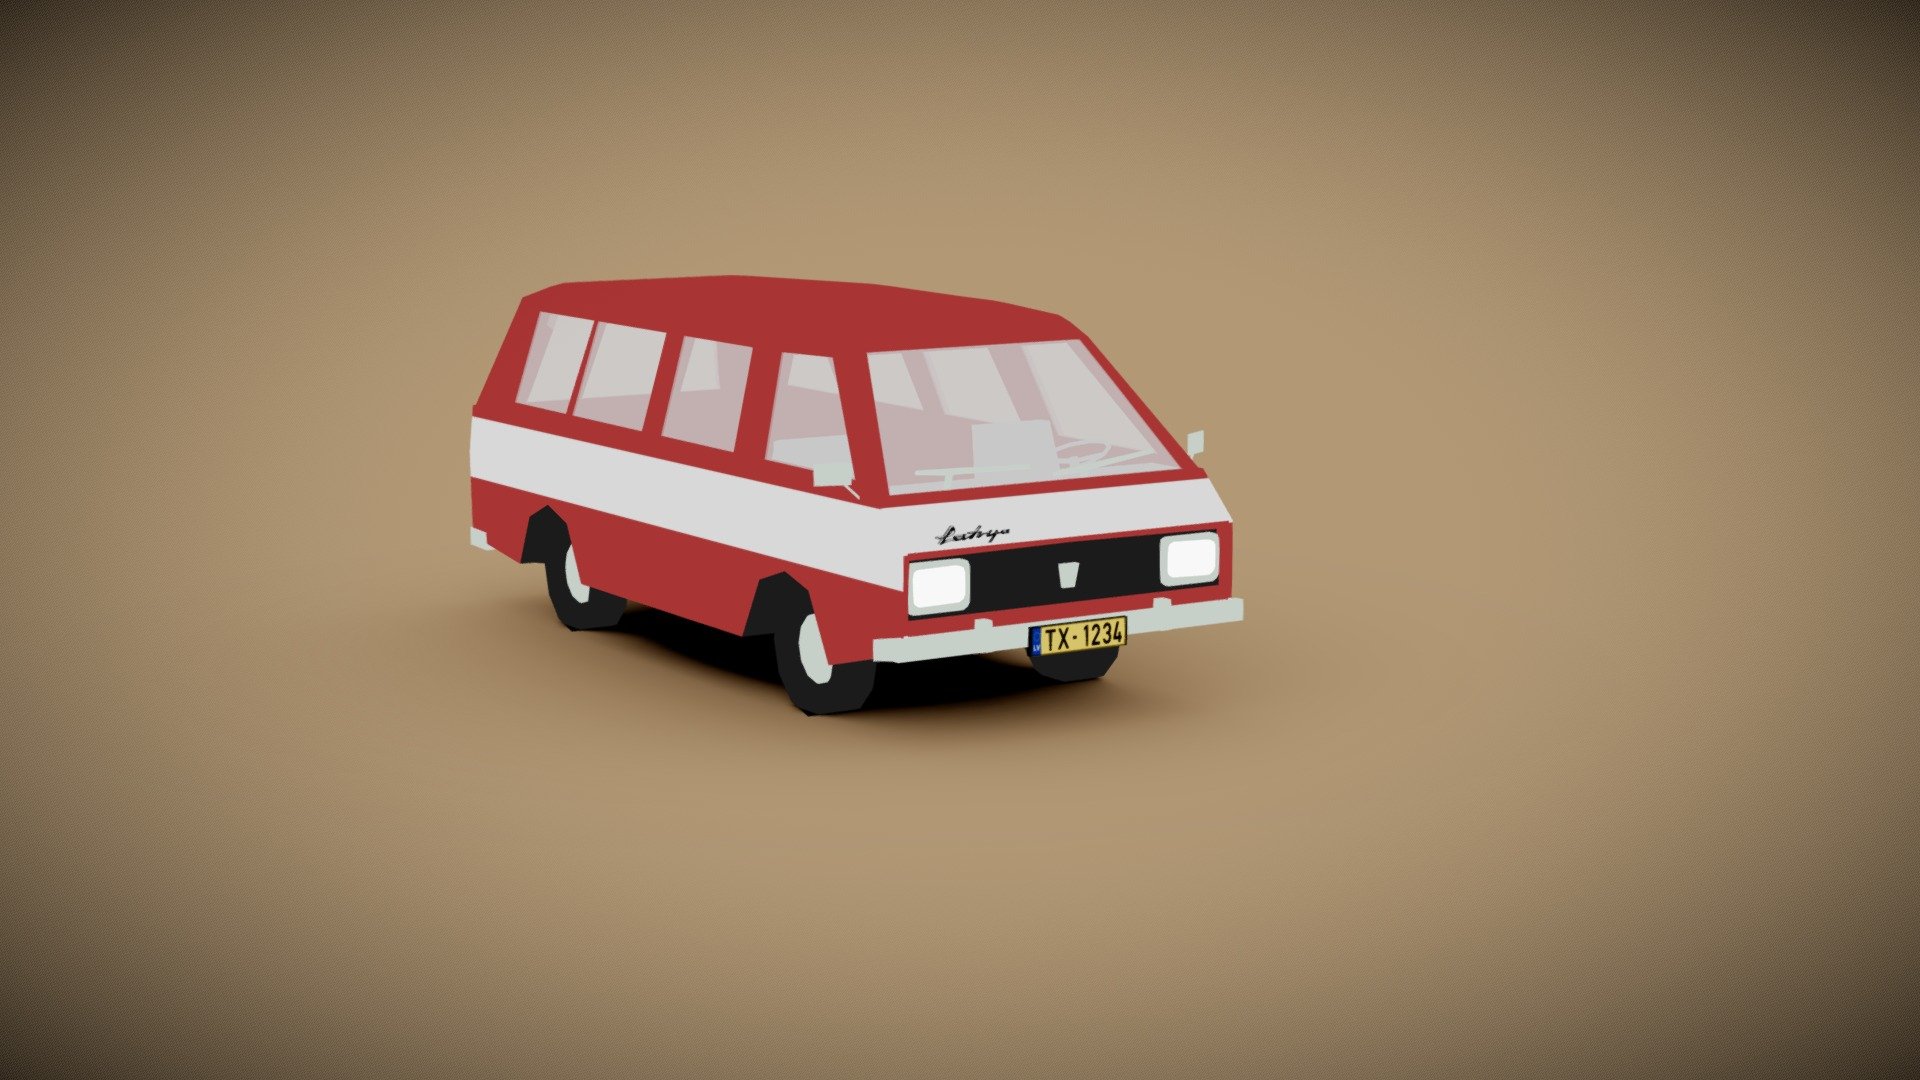 Passenger taxi van, based mostly on RAF-2203 van made in Riga Bus Factory from, like, 196something to 1997. The only proper light motor vehicle to ever be made in my home country of Latvia.
Since i am still learning Maya, it is probably not as low poly as it could be, but i'm trying 3d model